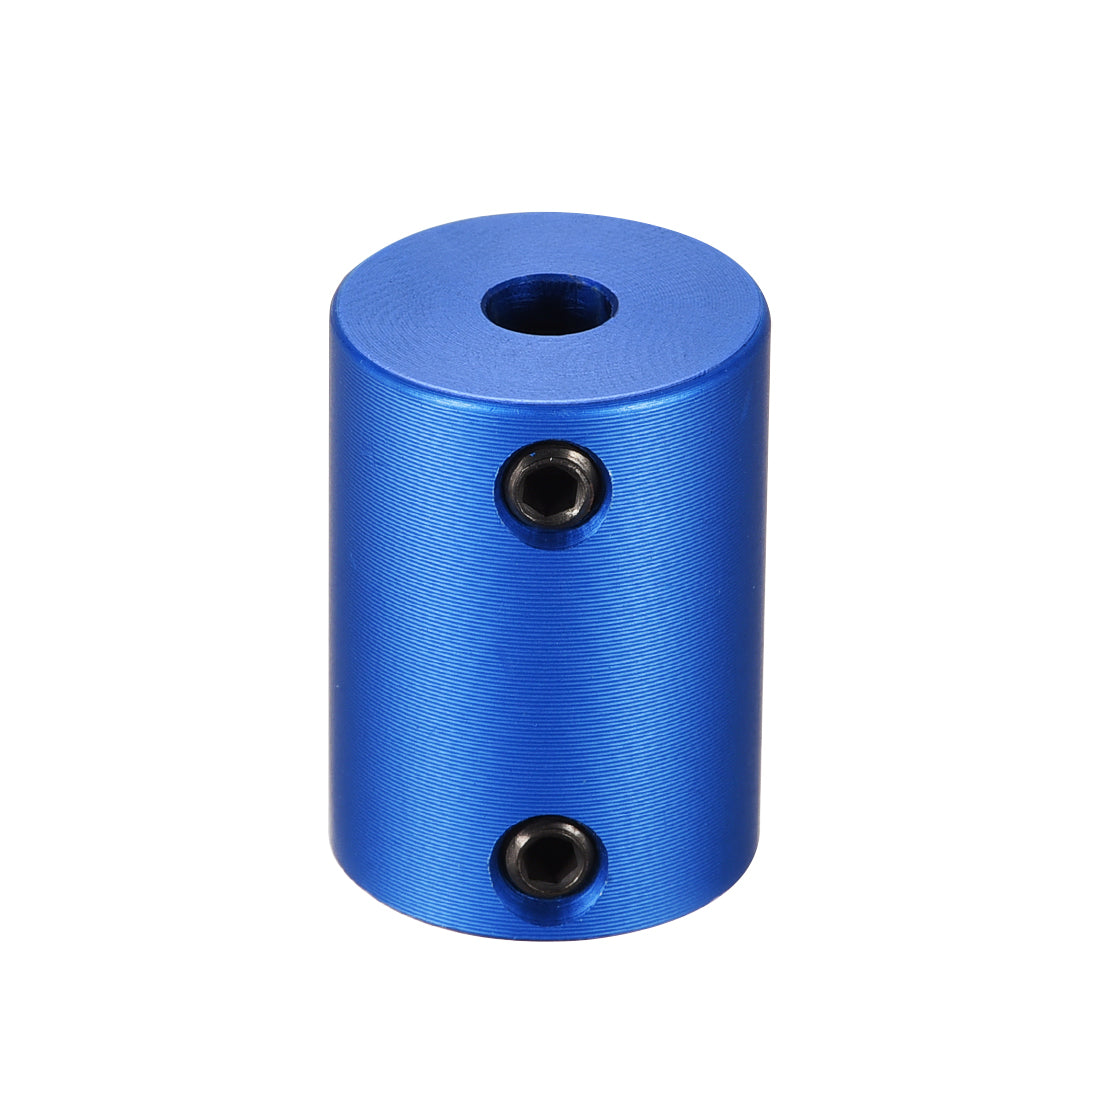 Uxcell Uxcell 8mm to 10mm Bore Rigid Coupling 25mm Length 18mm Diameter Aluminum Alloy Shaft Coupler Connector Blue